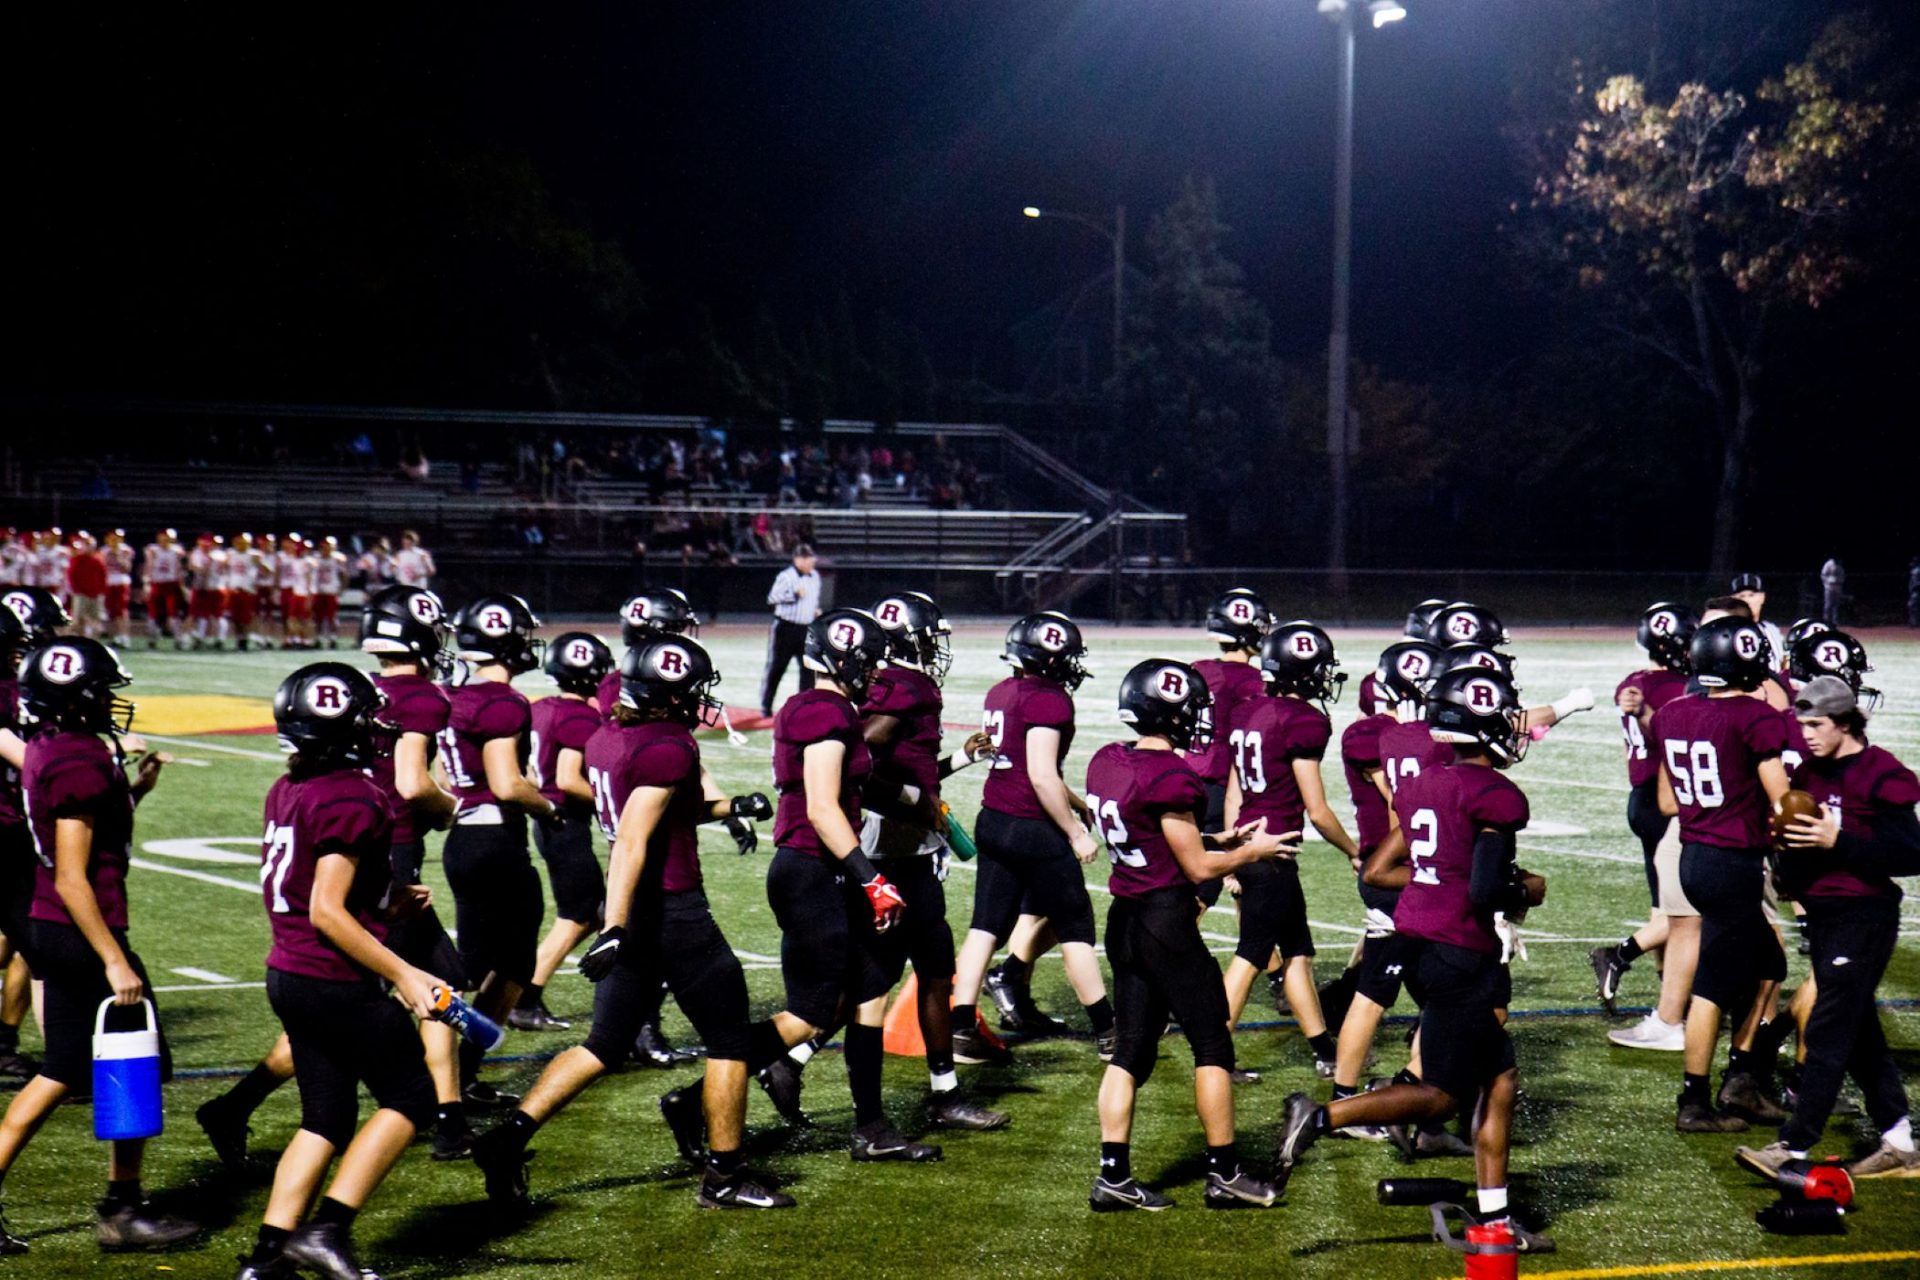 The Radnor High School football team takes the field on October 22, 2021. The school recently changed their mascot to the Raptors.